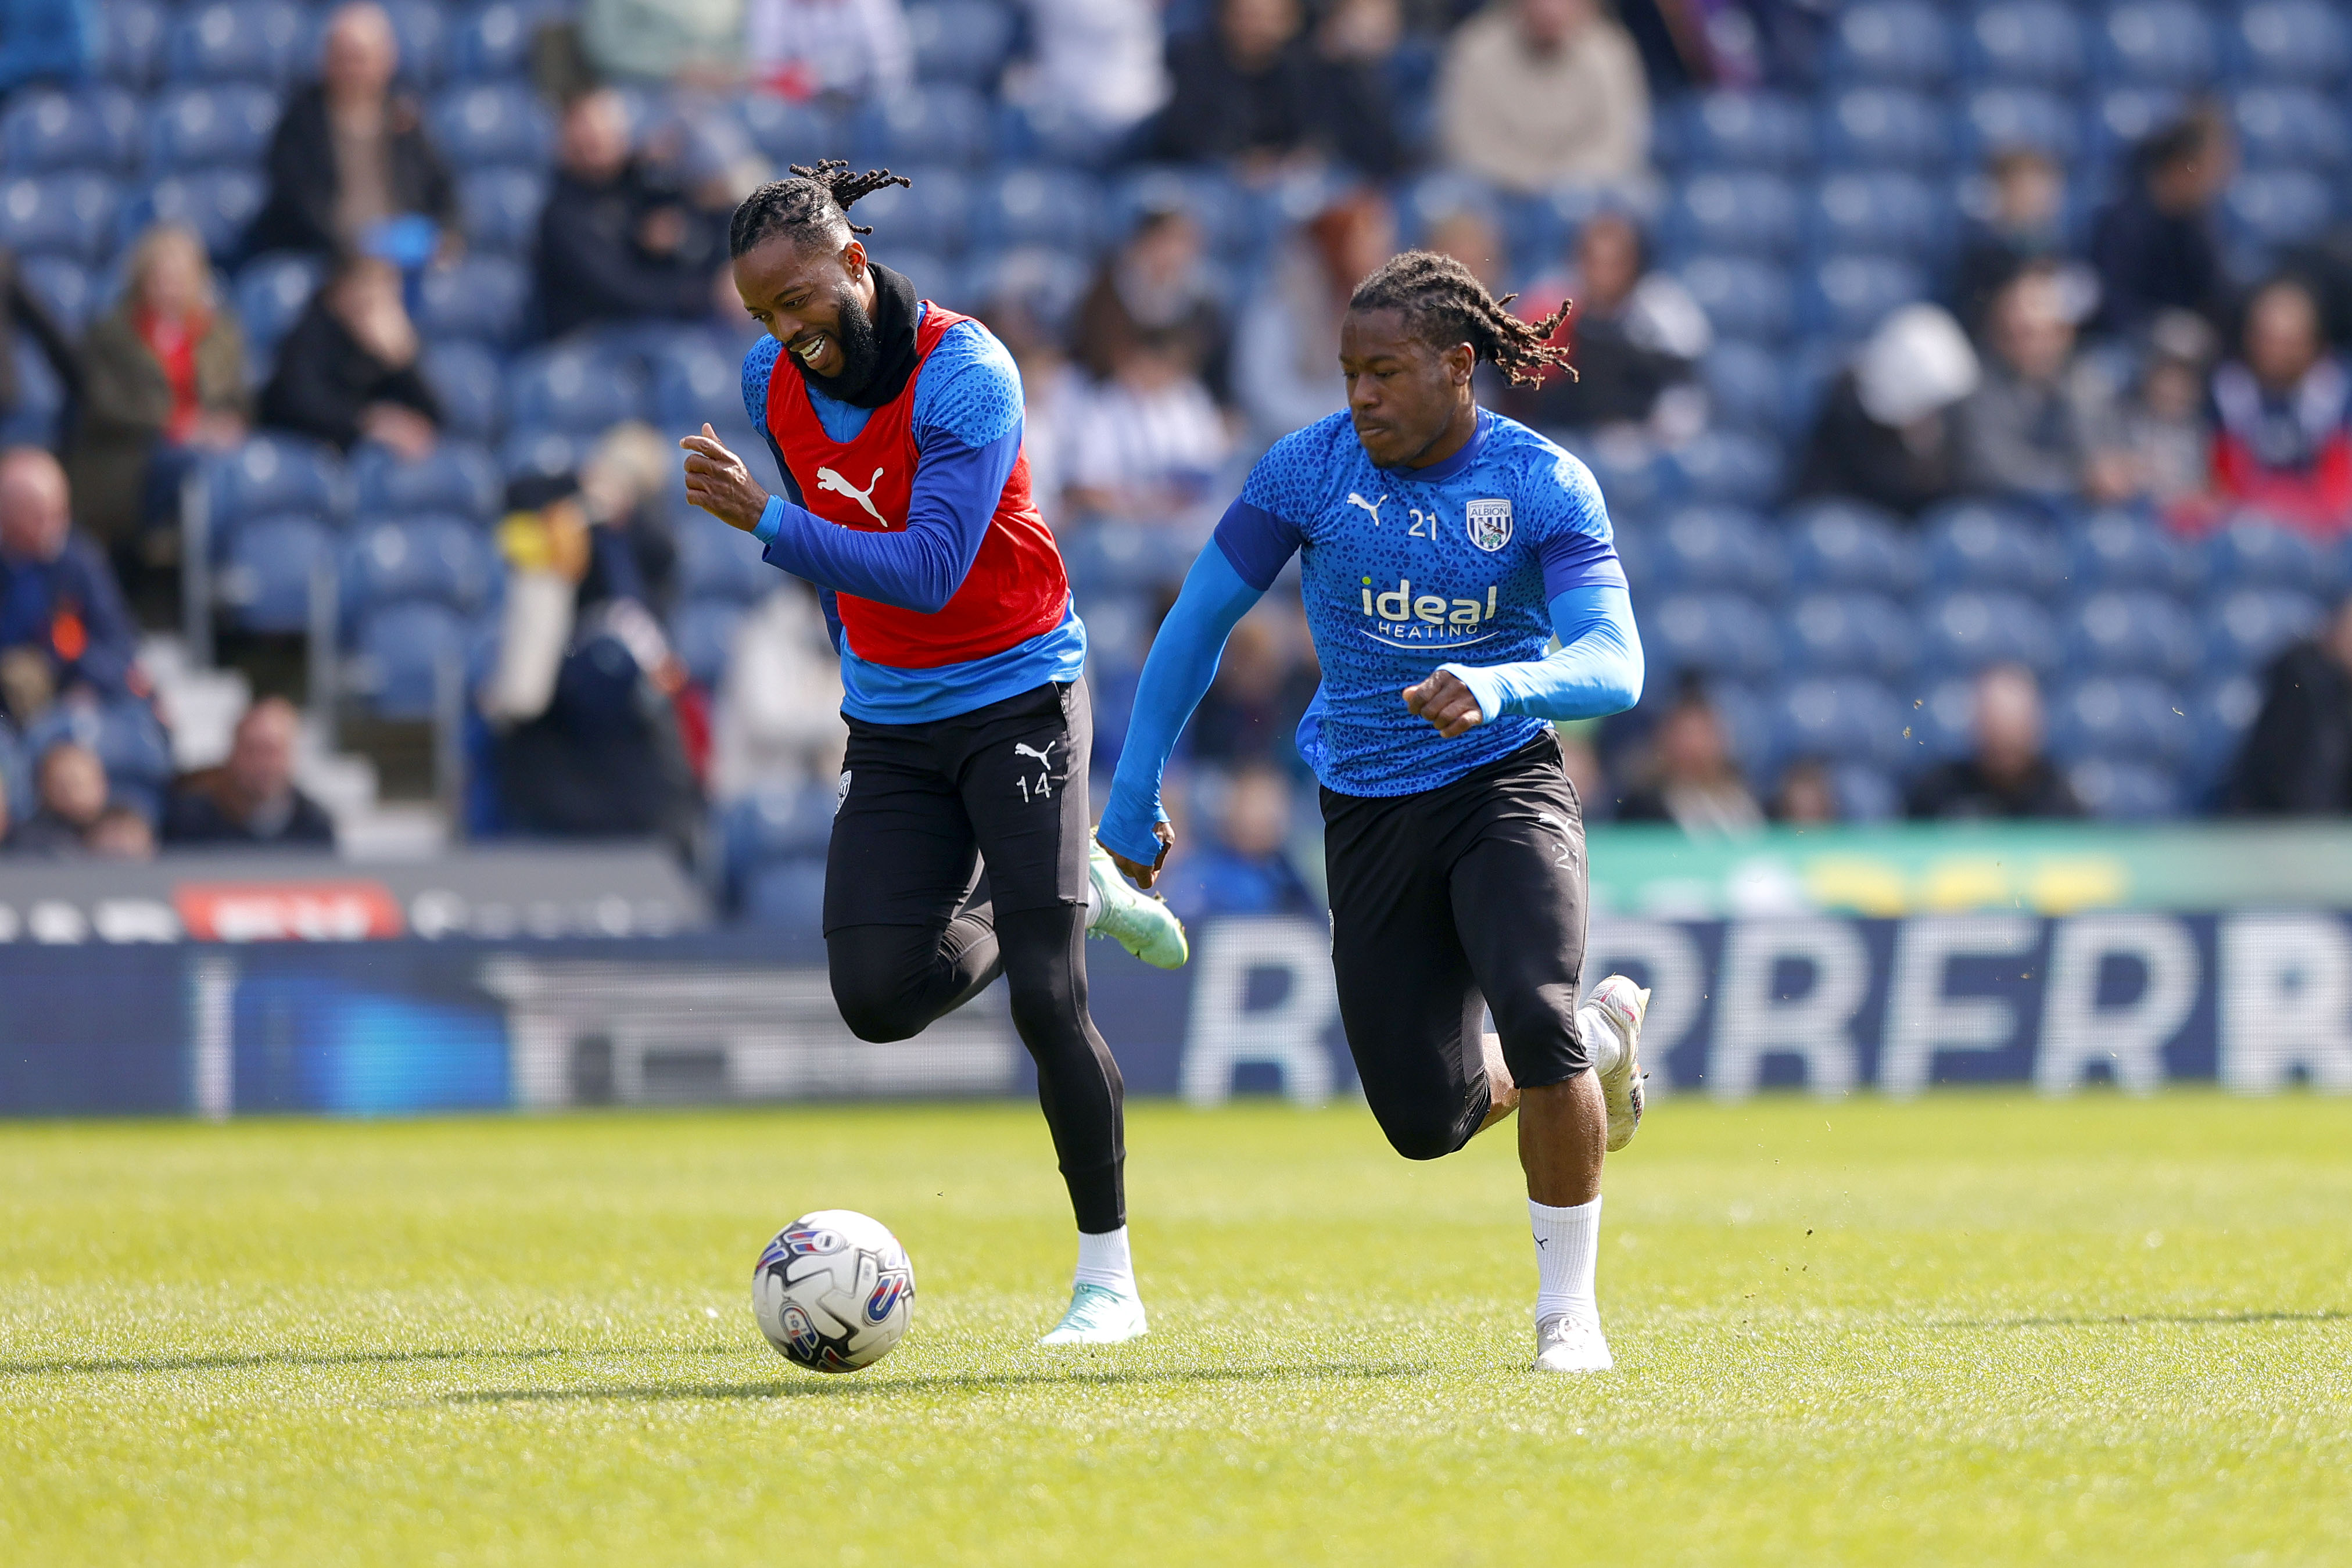 Brandon Thomas-Asante and Nathaniel Chalobah chasing after the ball during a training session at The Hawthorns